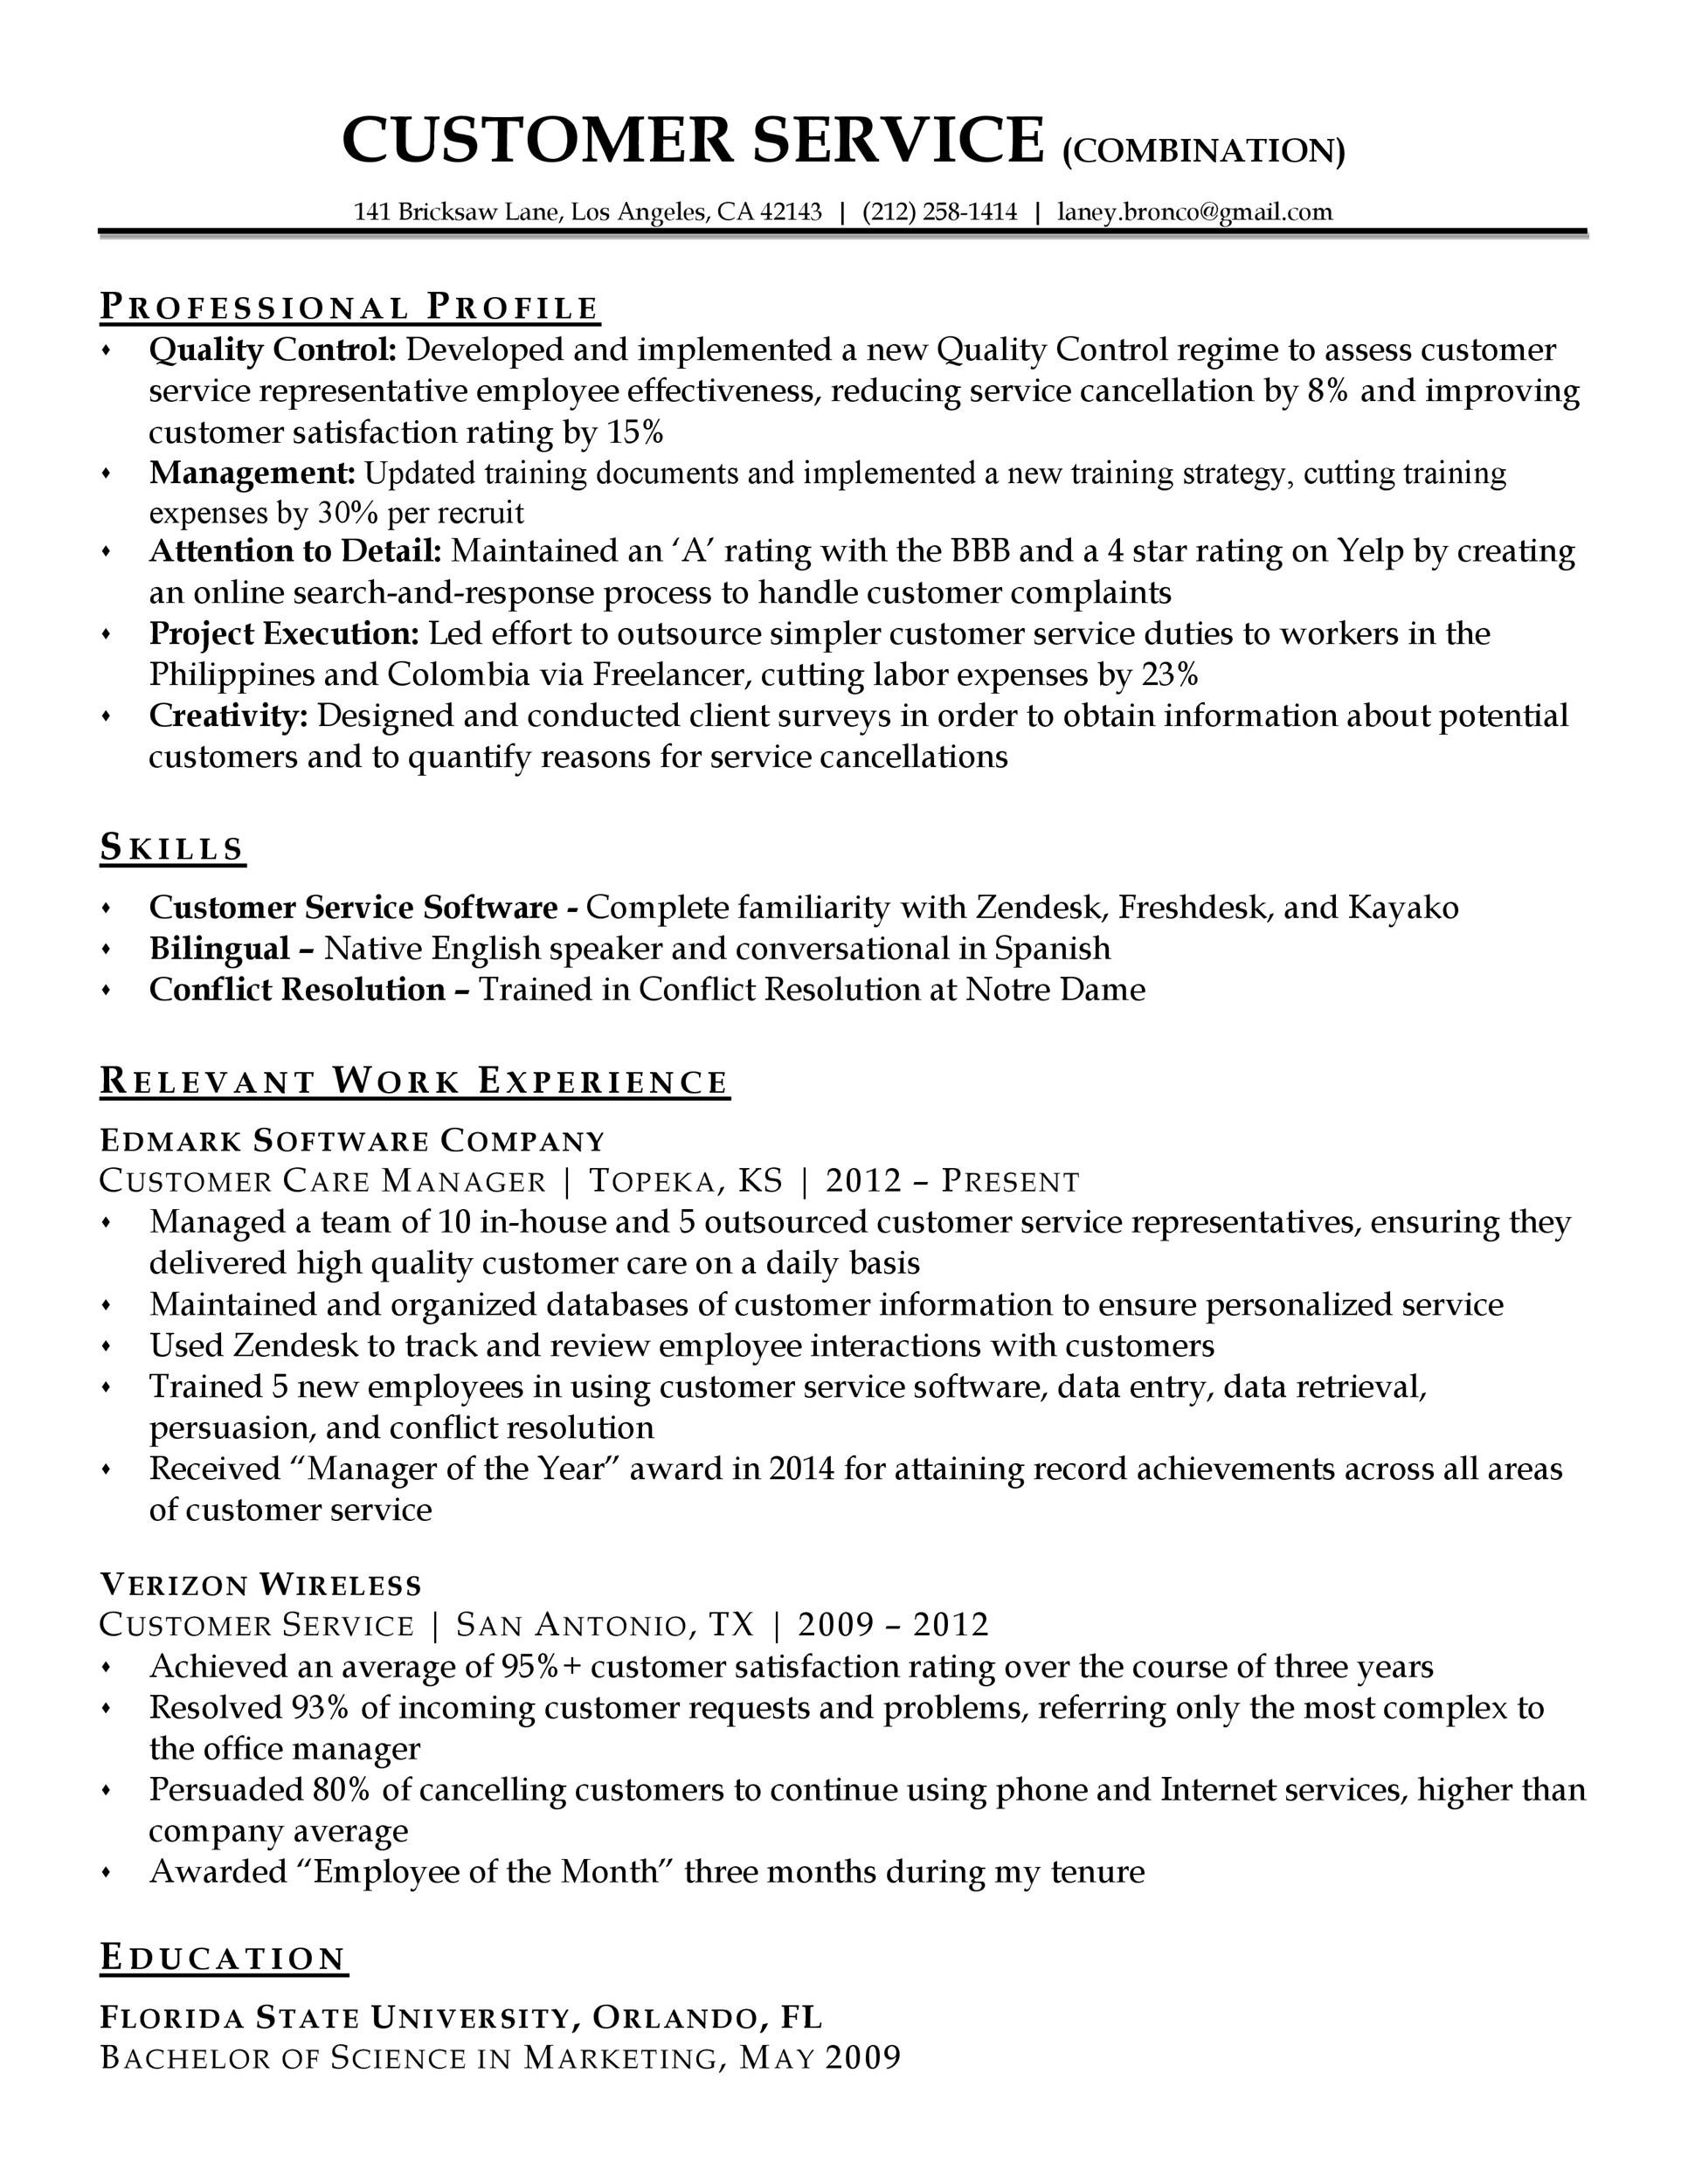 Professional Summary Resume Sample for Customer Service 30 Customer Service Resume Examples Templatelab